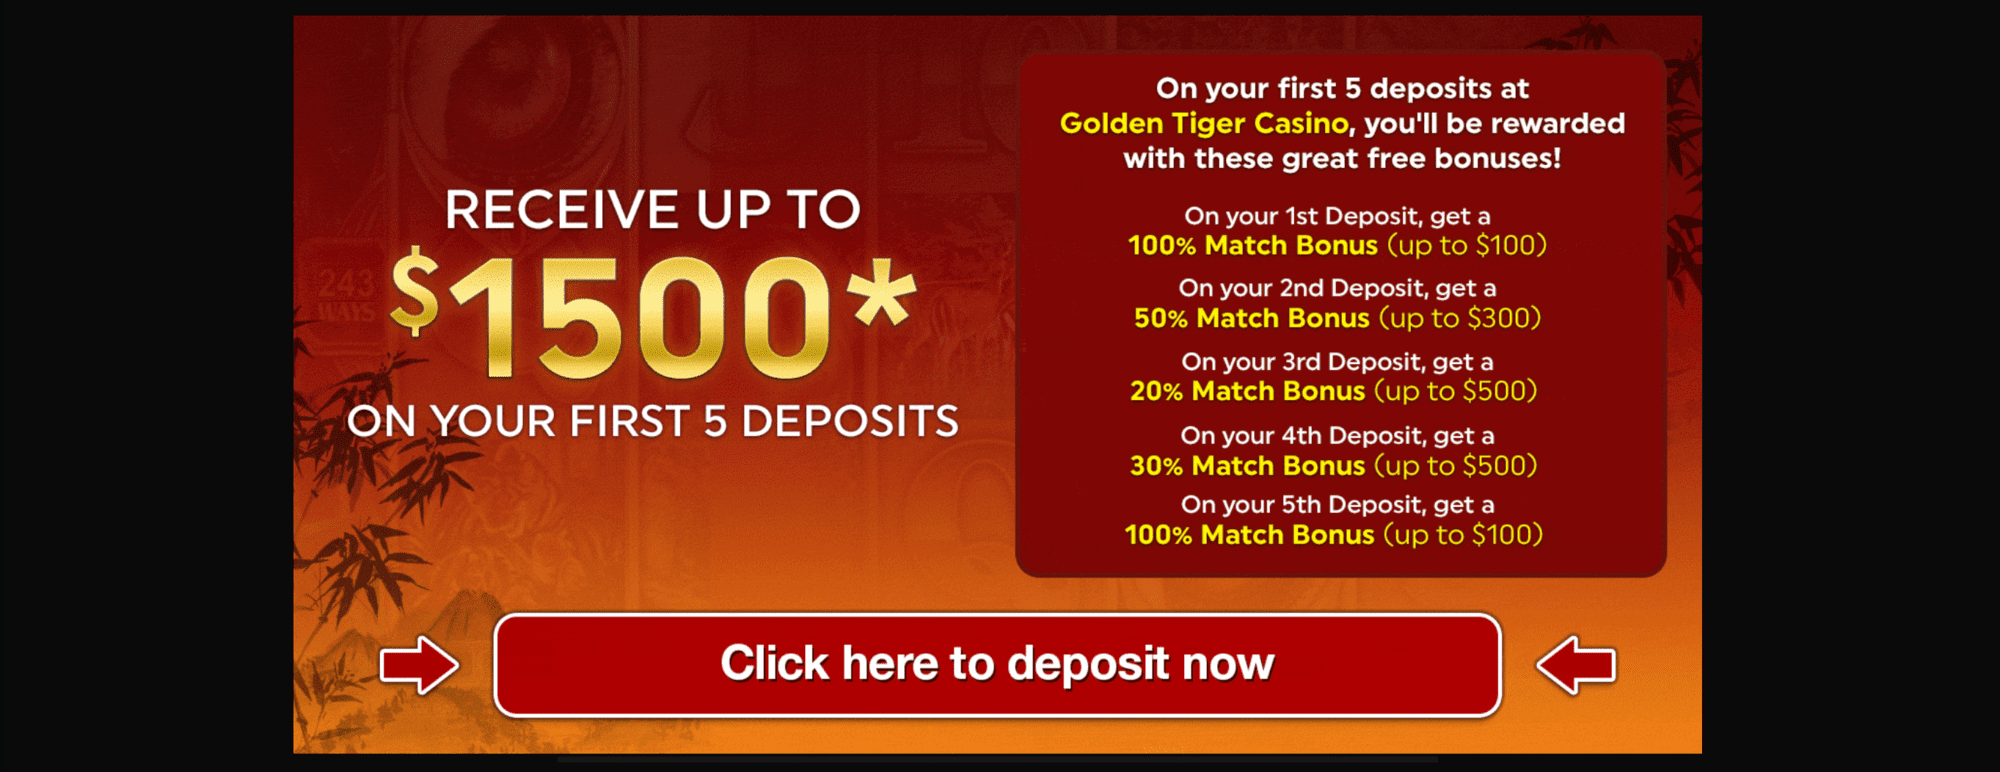 Golden Tiger Casino bonuses for new players